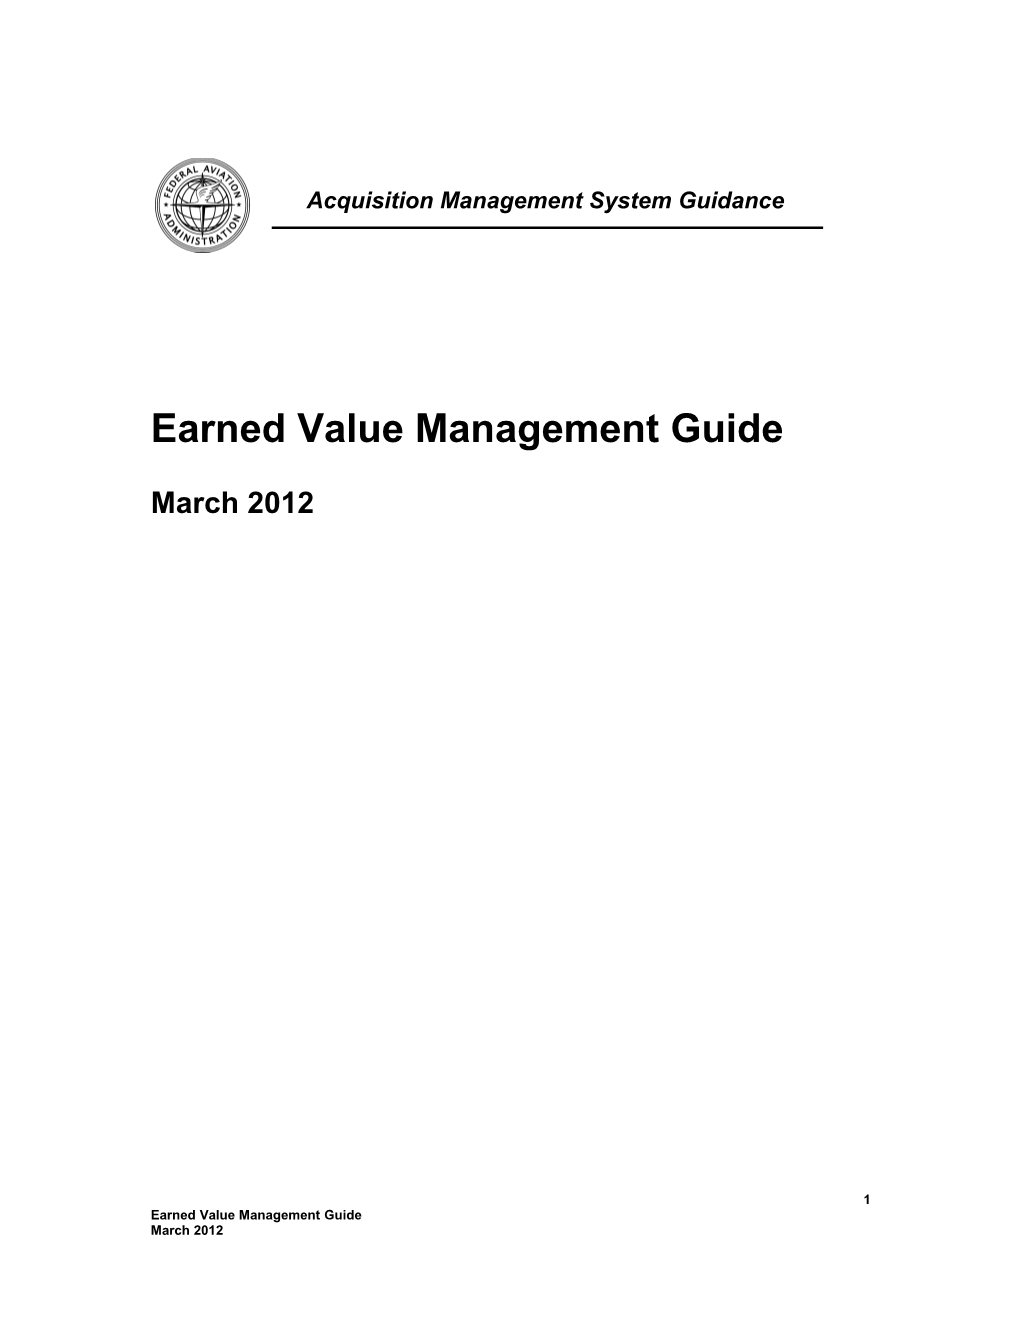 FAA Earned Value Management Guidance - Download Selected Sections